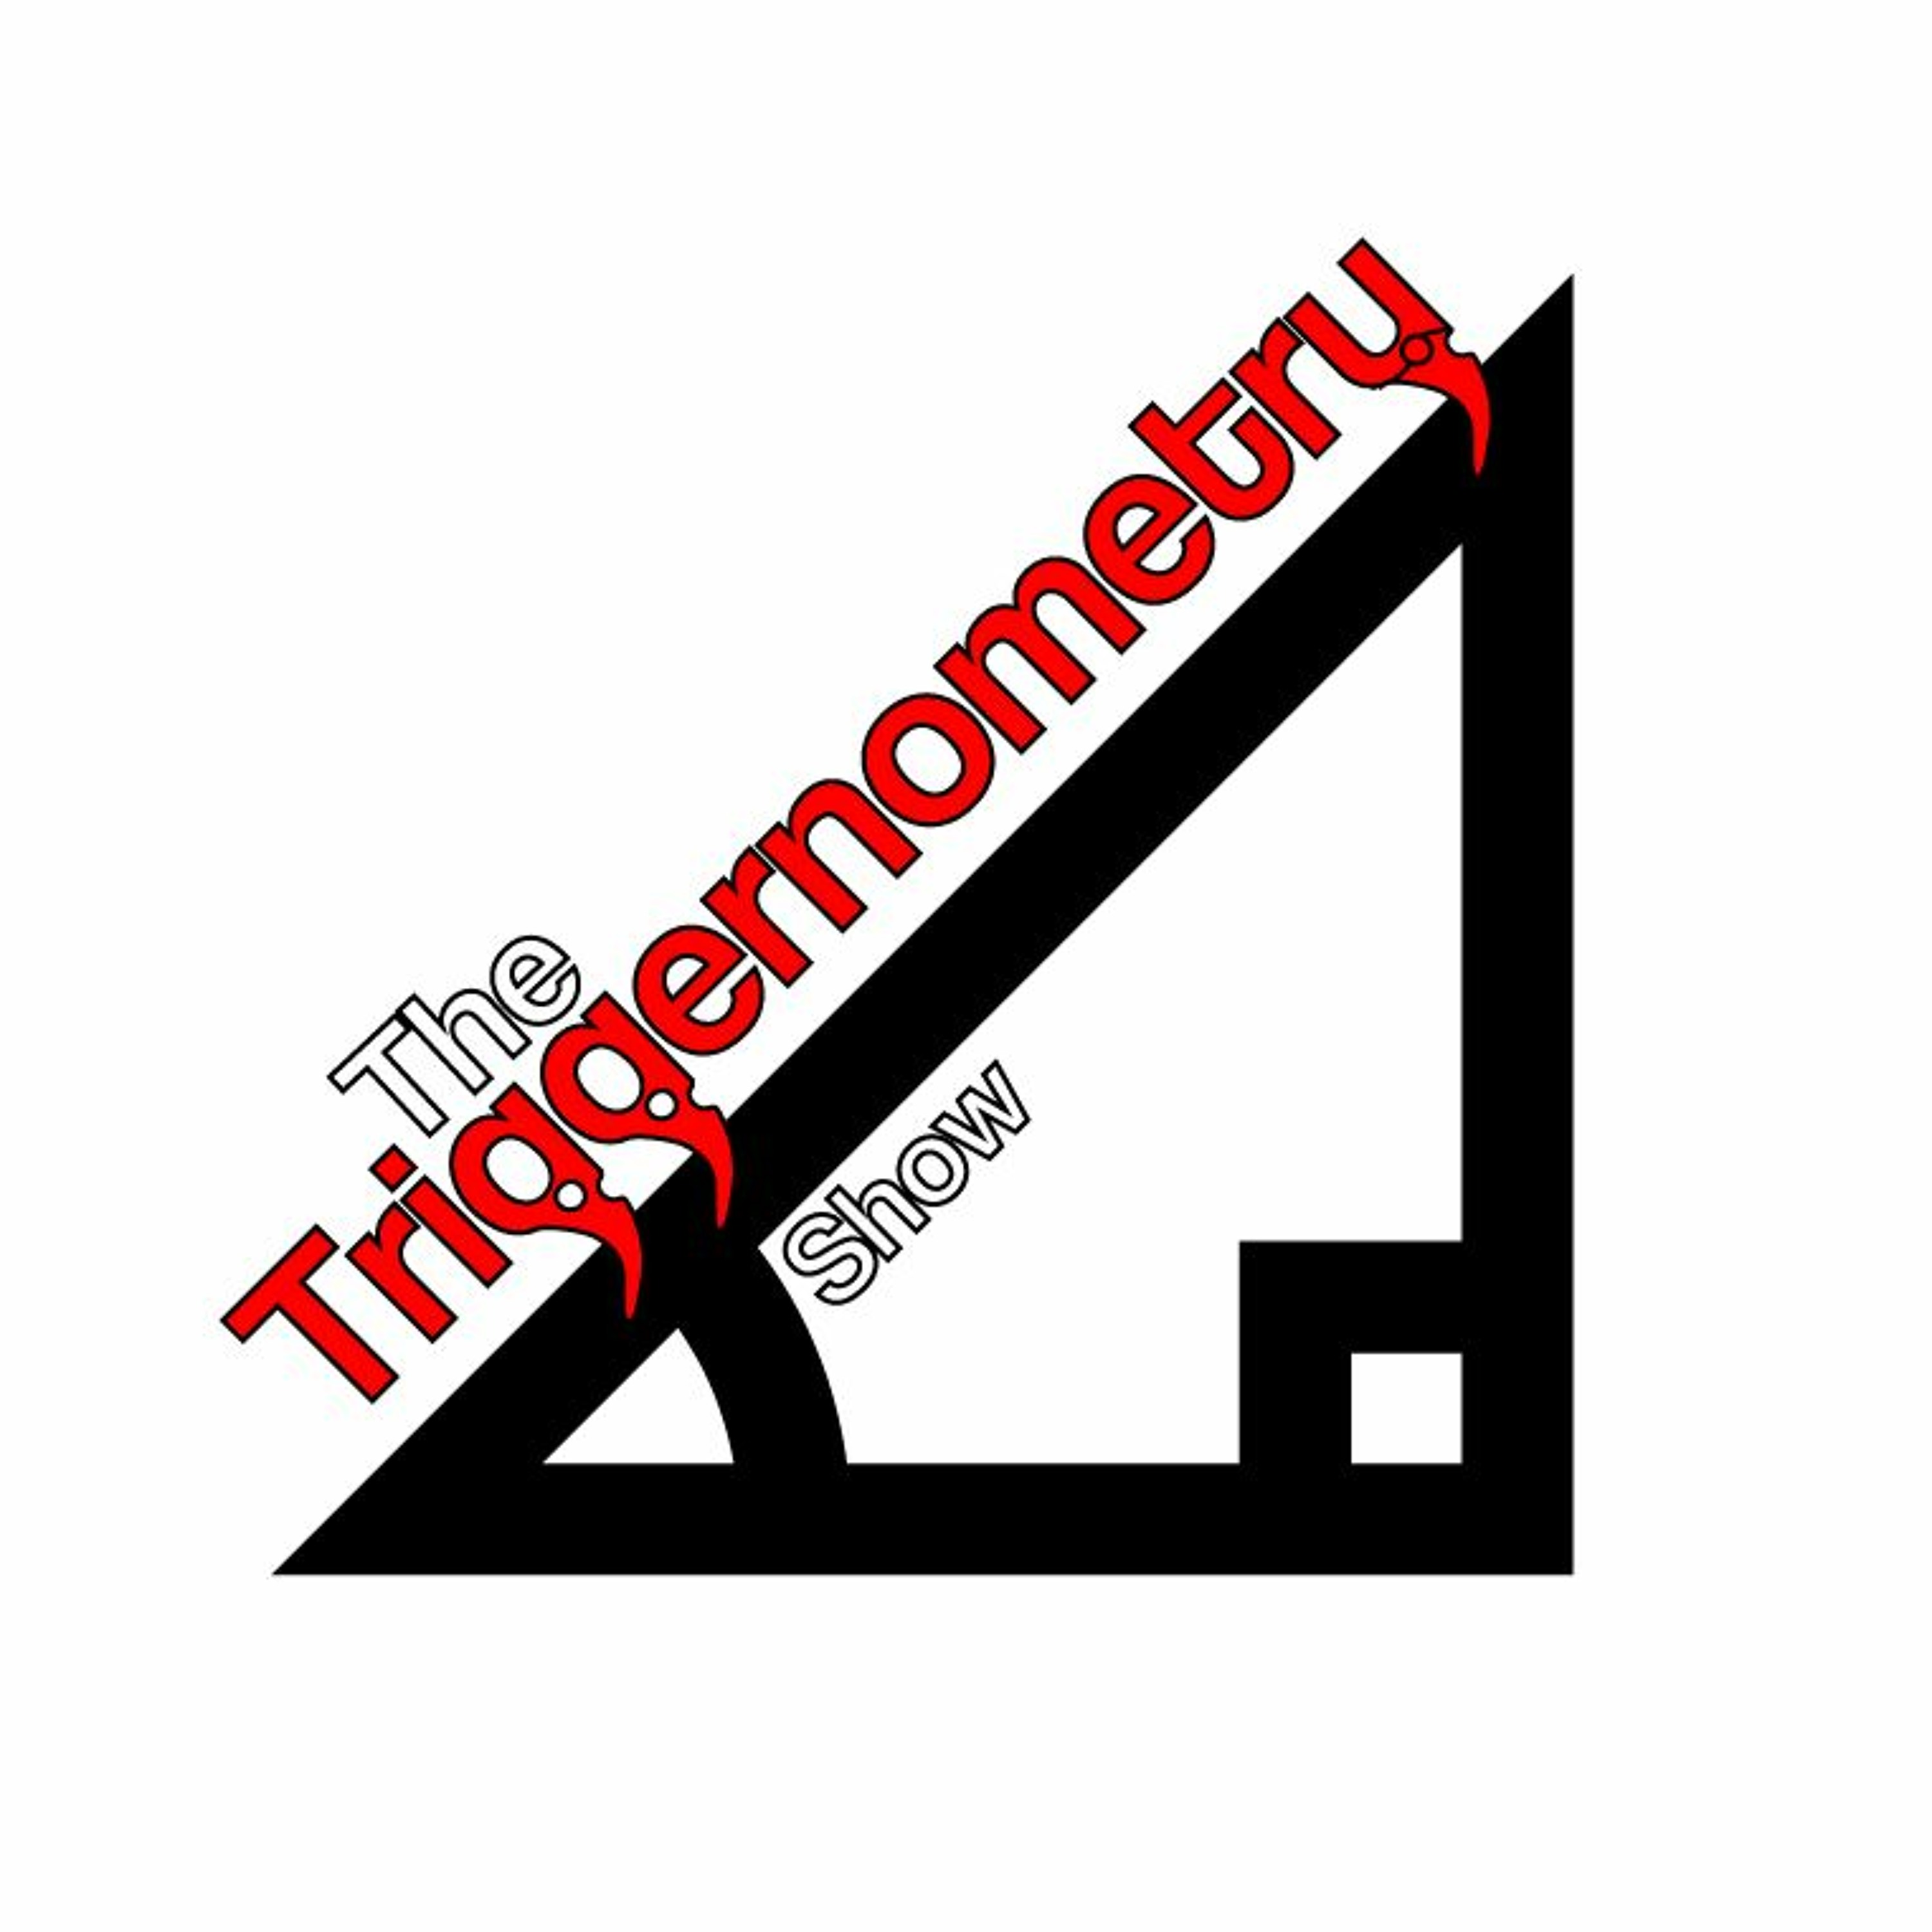 The Triggernometry Show - 19th September 2020 - Kerry, Graeme, Geoff and Cassie from the Gunrack!